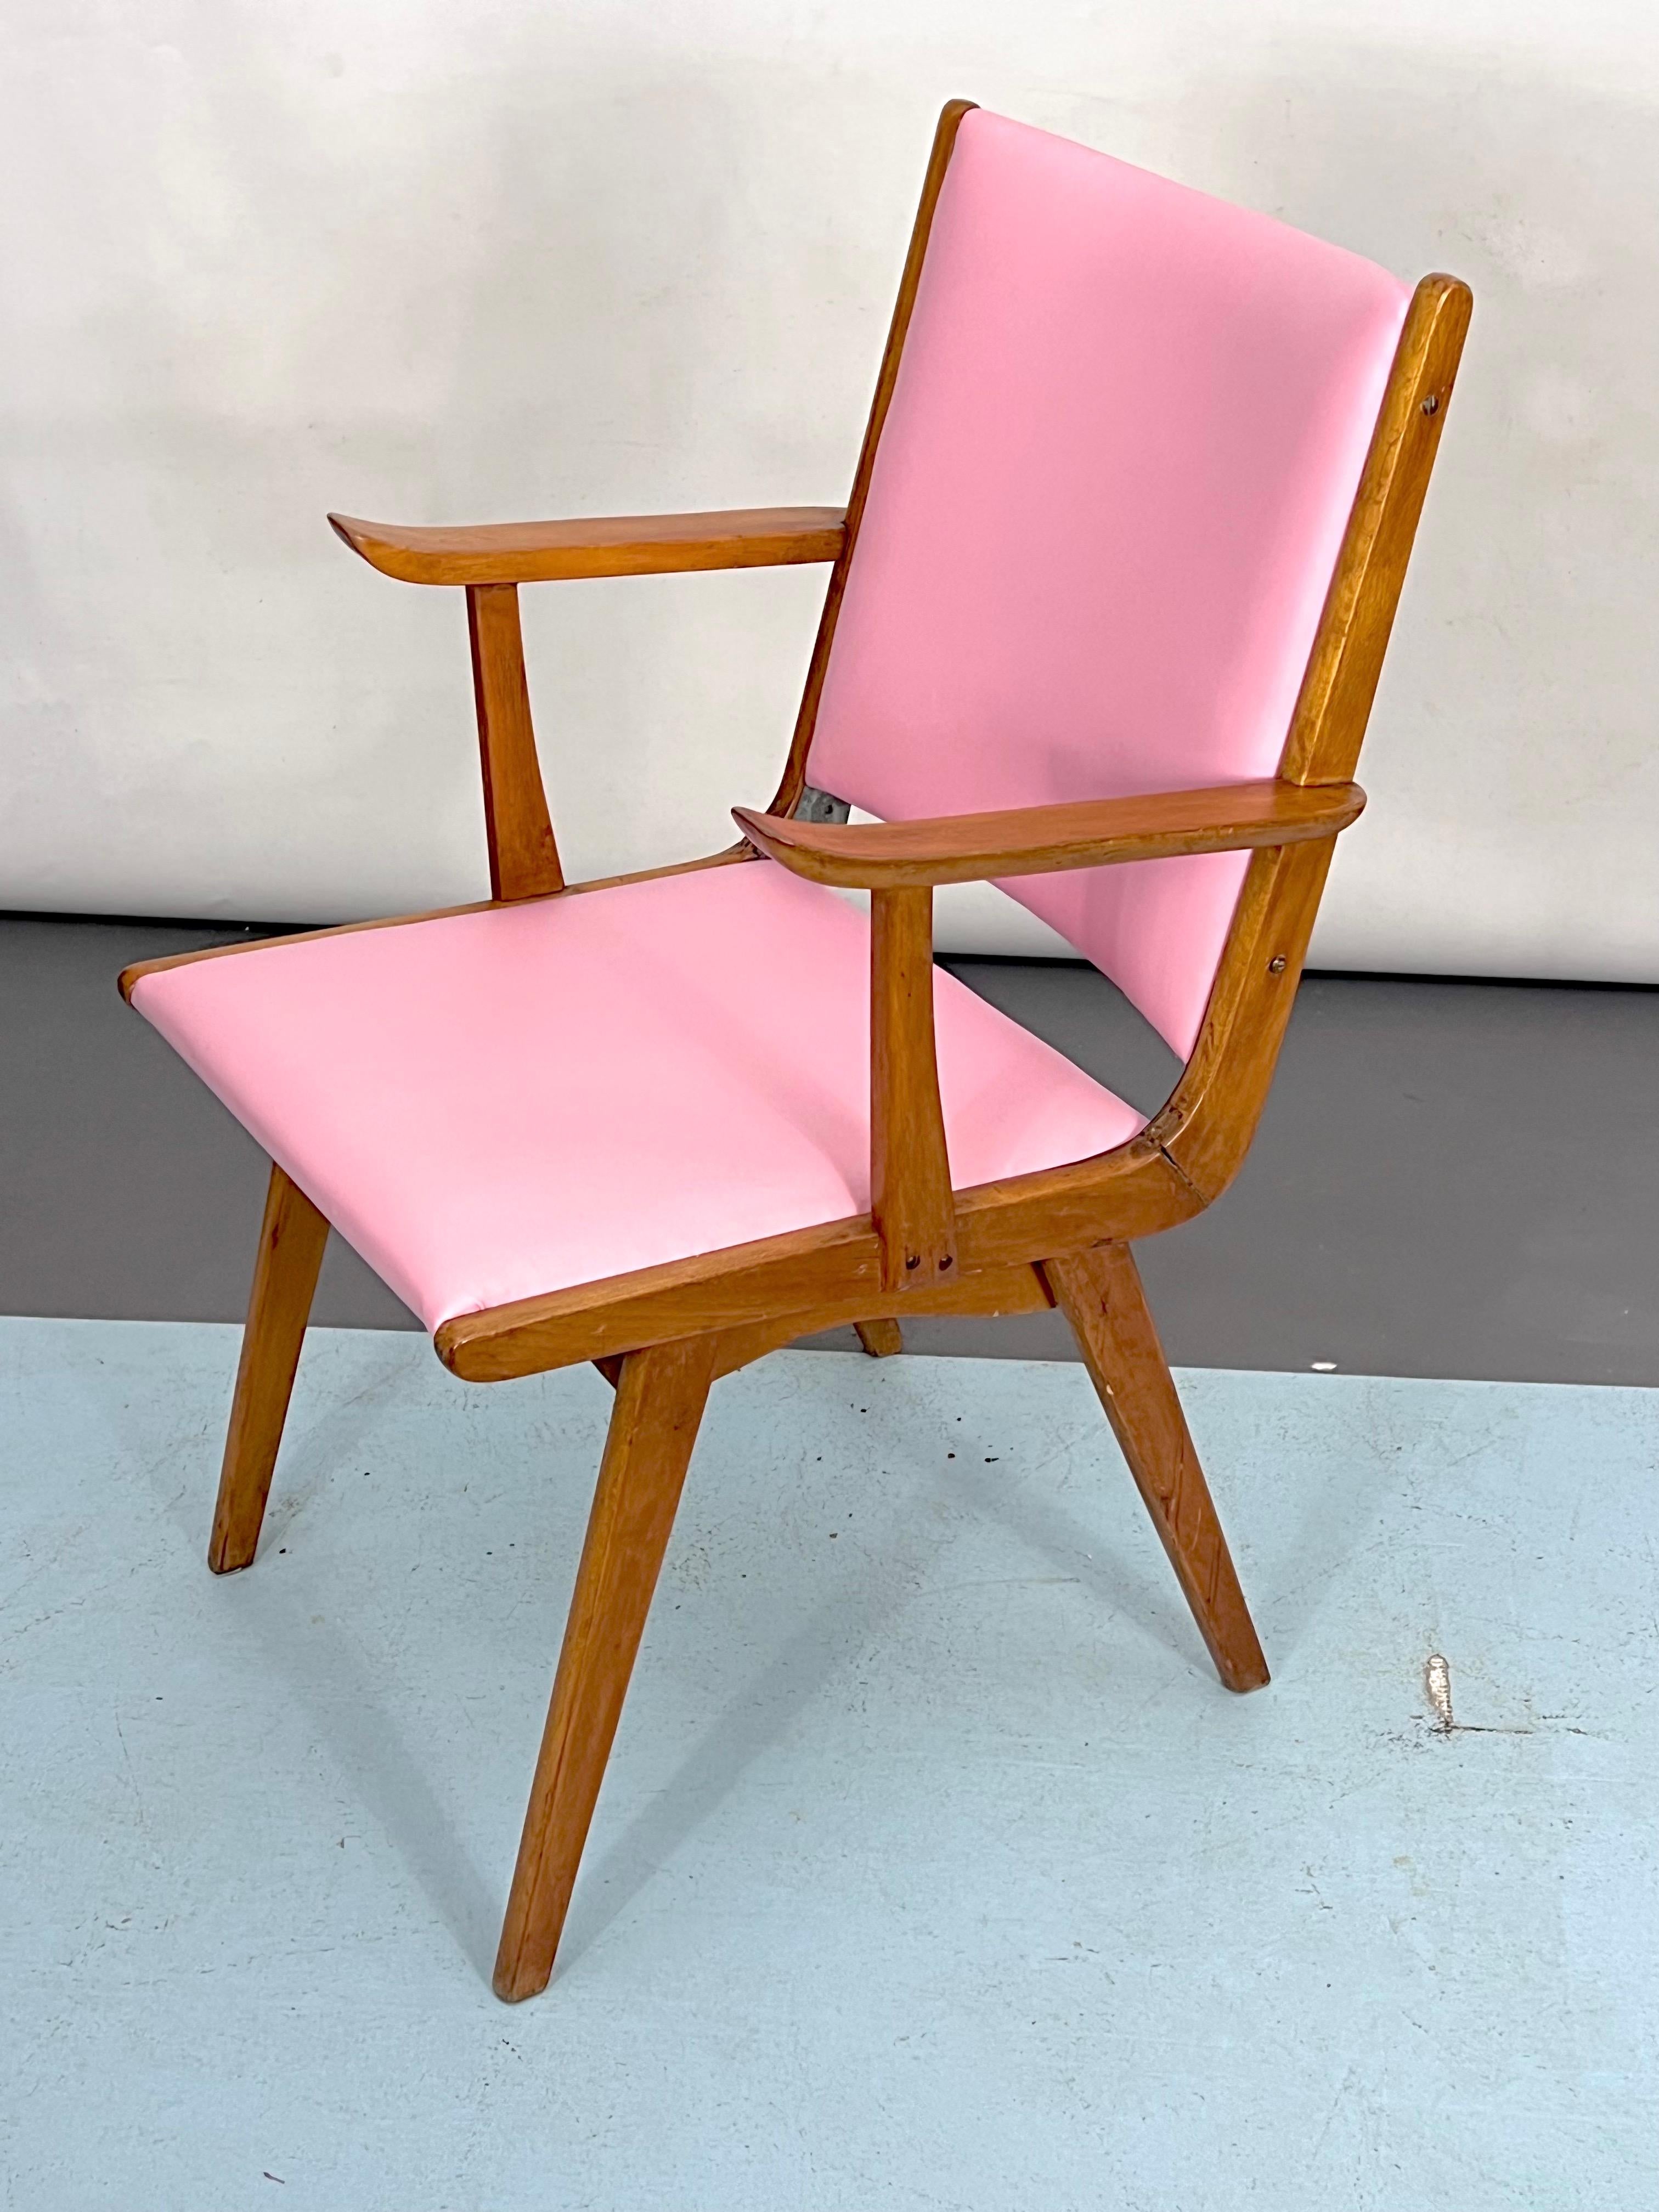 Vintage Italian Wood Accent Chair in Pink Leatherette, Italy, 1950s For Sale 1